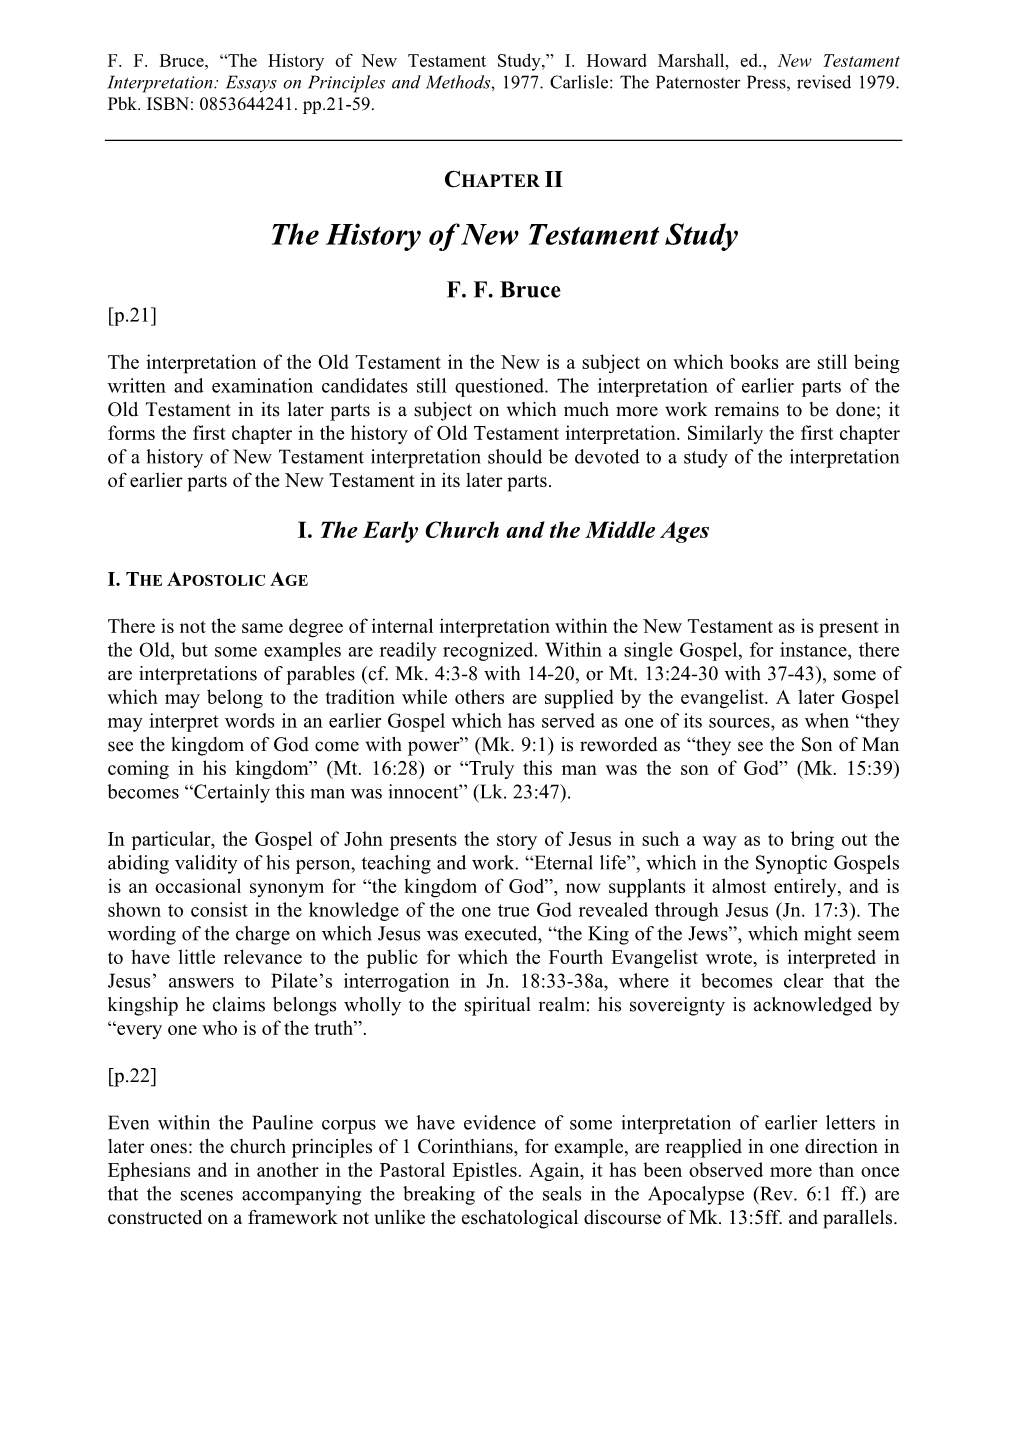 The History of New Testament Study,” I